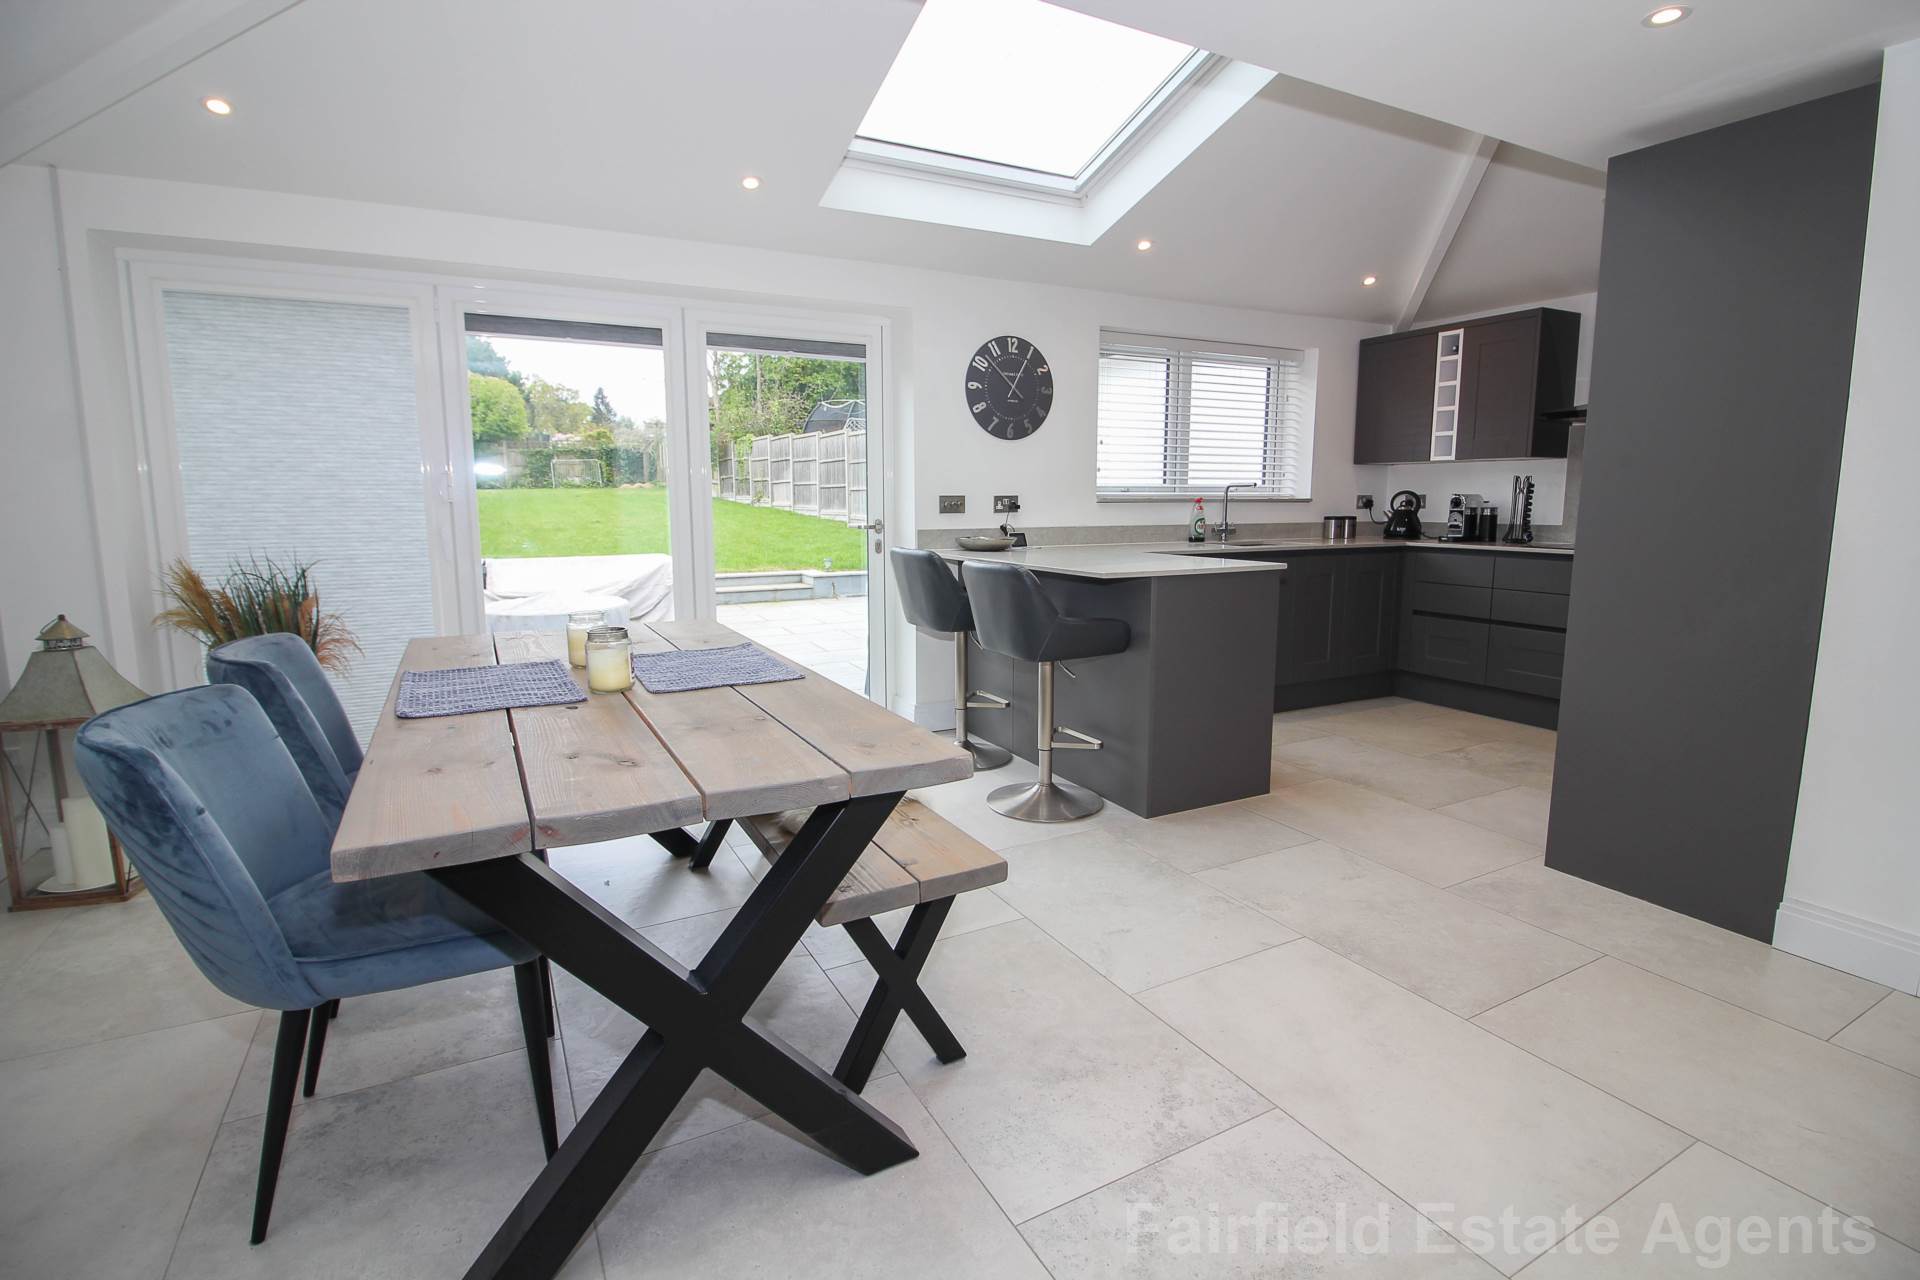 3 bed Semi-Detached House for rent in Watford. From Fairfield Estate Agents - Oxhey Branch